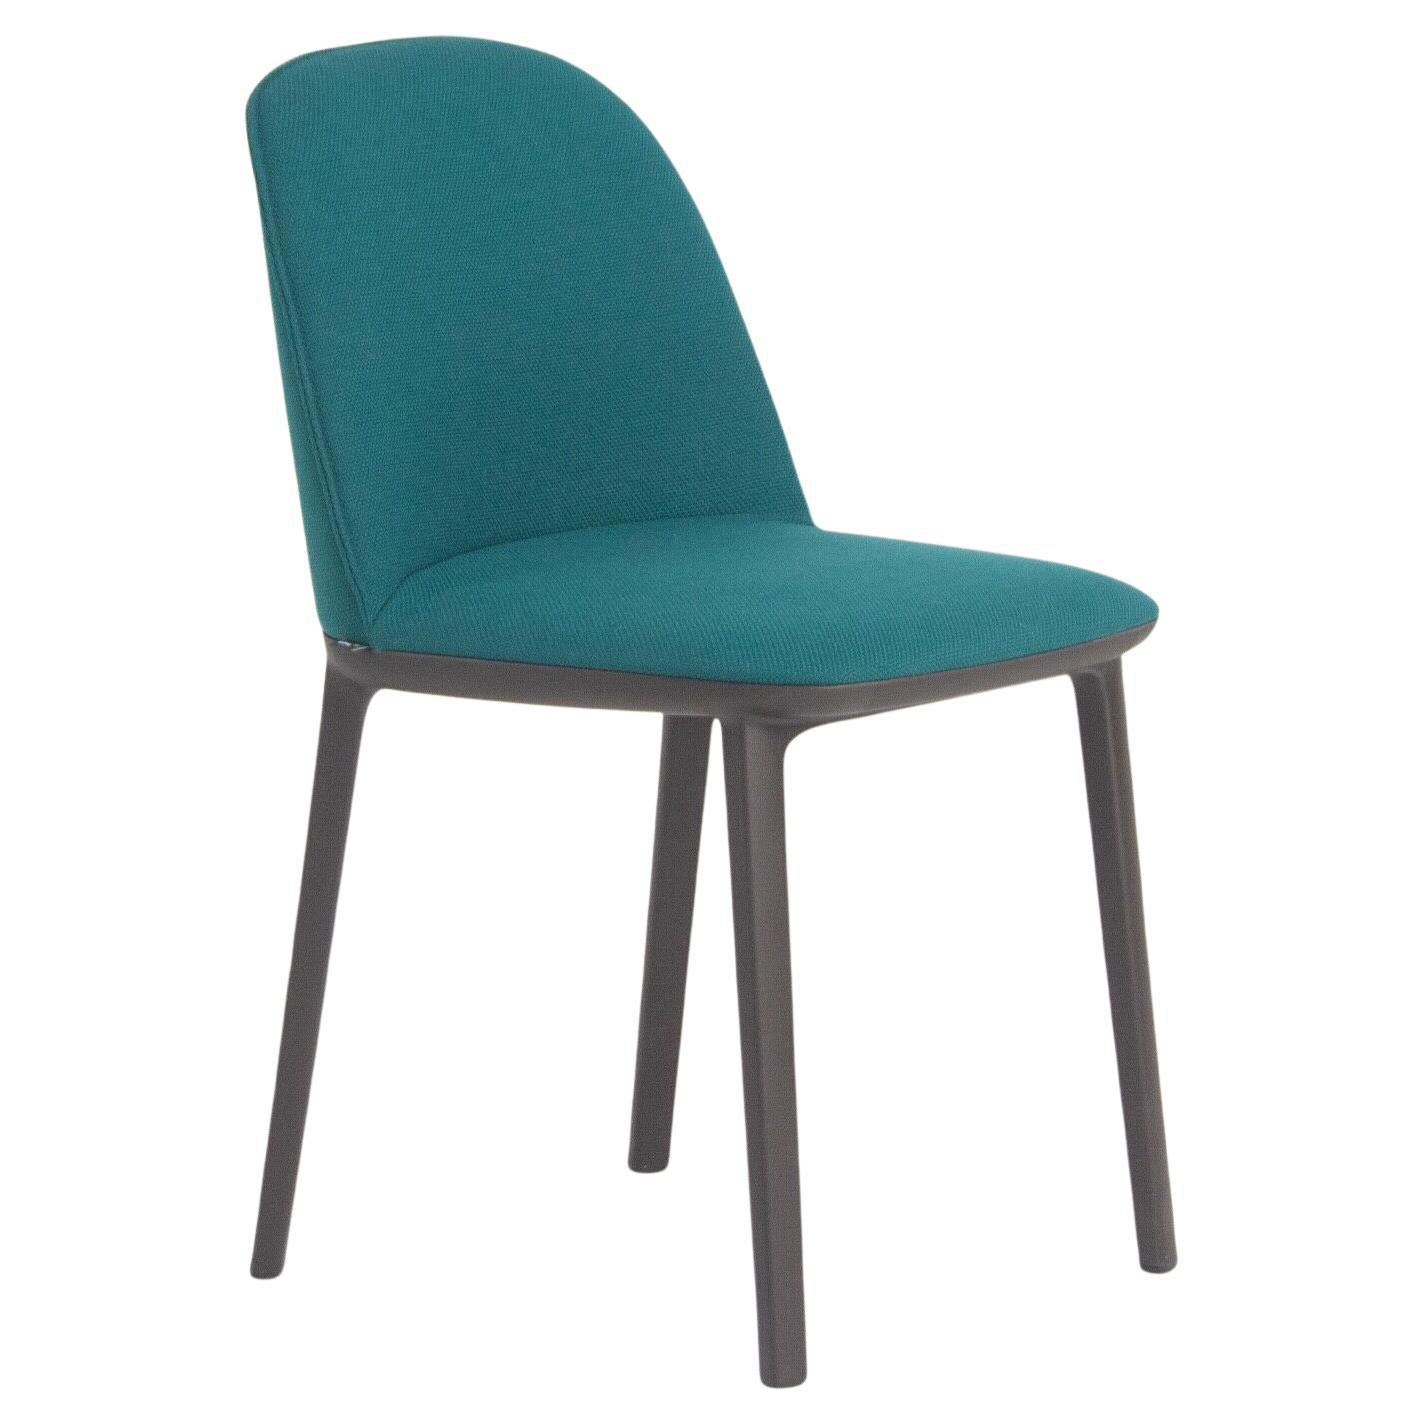 2019 Vitra Softshell Side Chair w/ Teal Blue Fabric by Ronan & Erwan Bouroullec For Sale